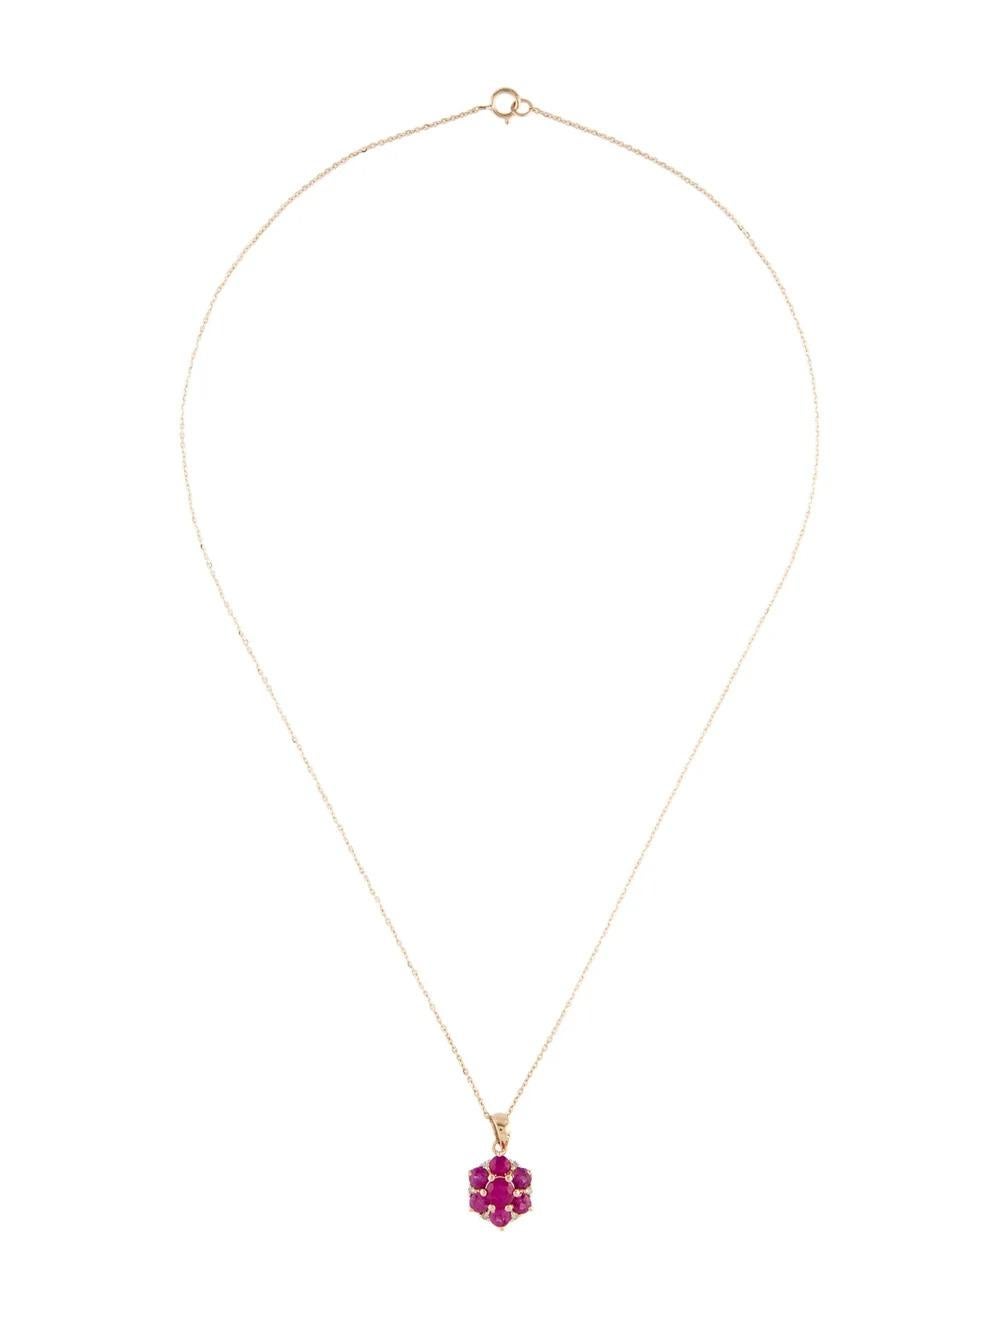 14K Ruby & Diamond Pendant Necklace - 1.09ctw Red Gemstone Jewelry, Luxury Piece In New Condition For Sale In Holtsville, NY